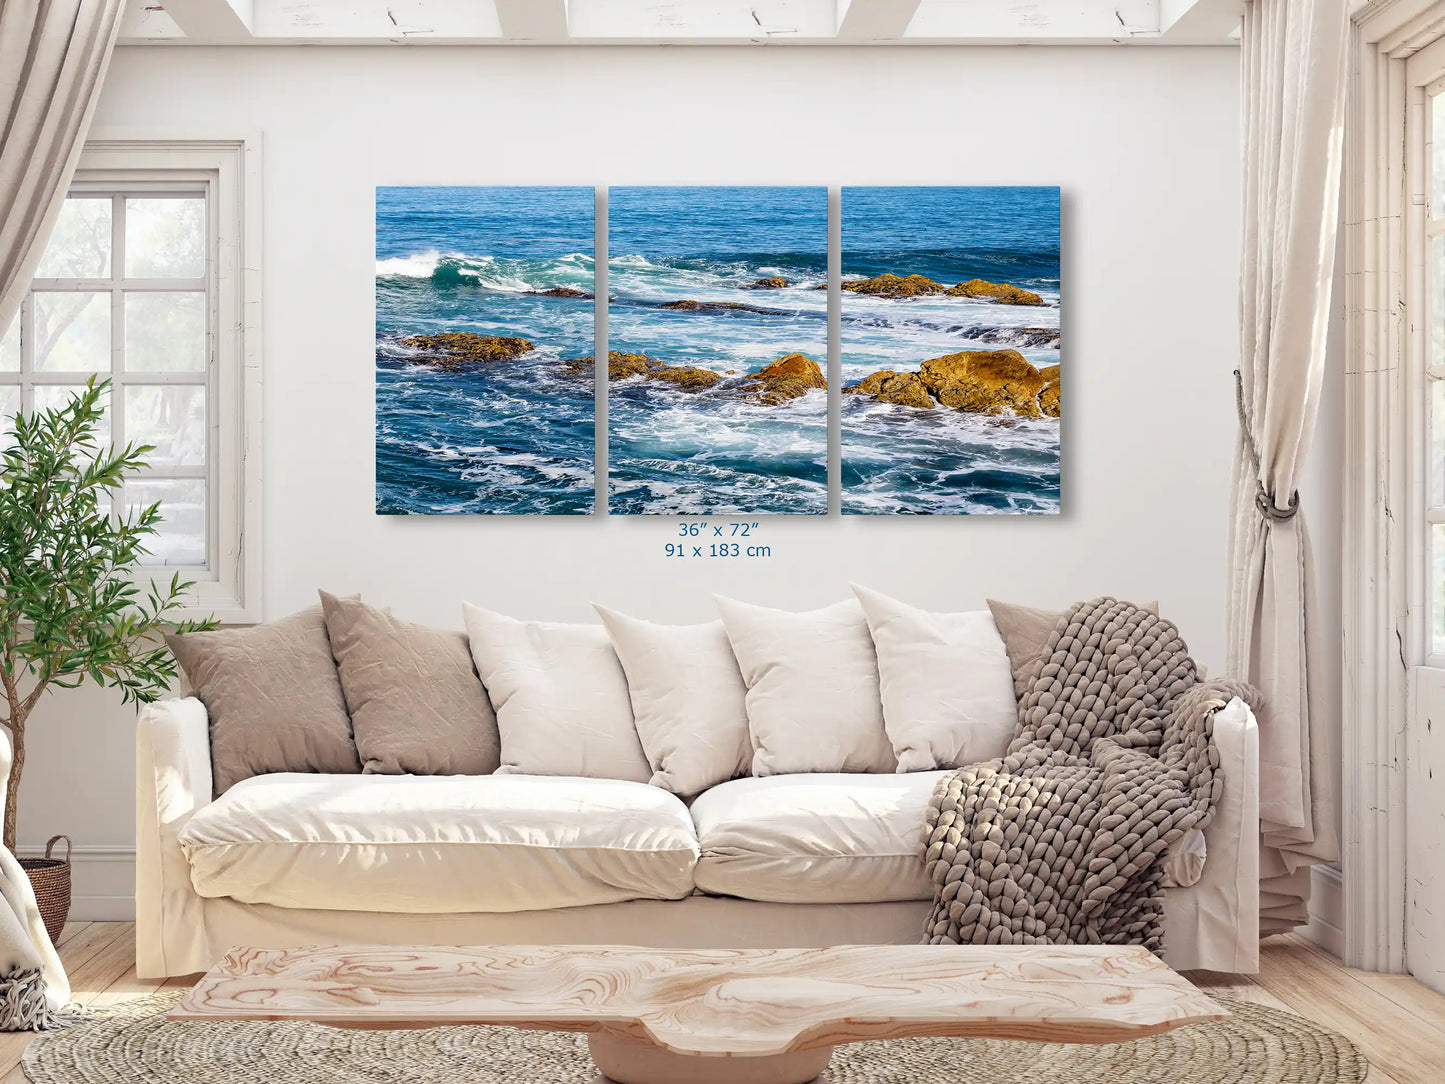 A triptych of the ocean scene, each panel measuring 36"x72", creating a statement piece above a living room sofa.